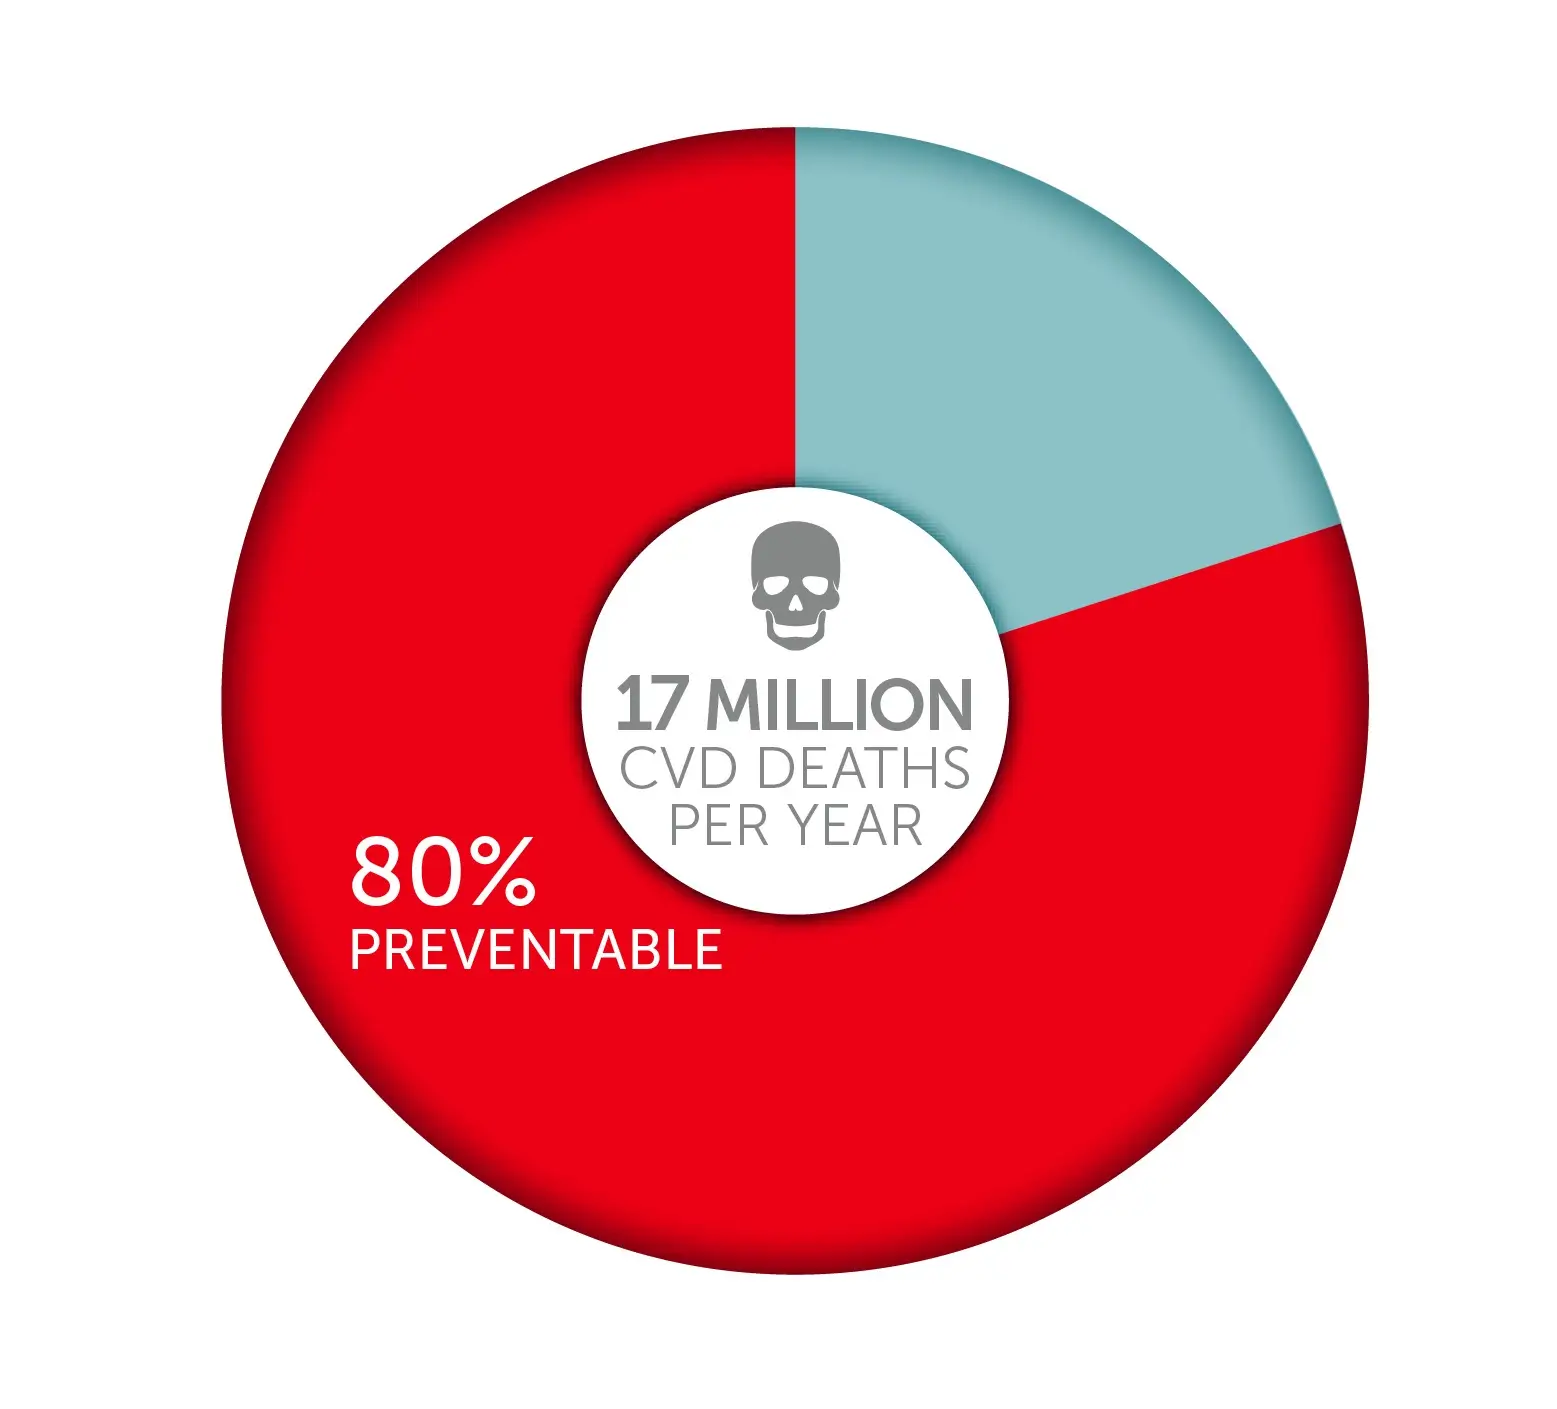 Pie chart showing how many CVD deaths per year